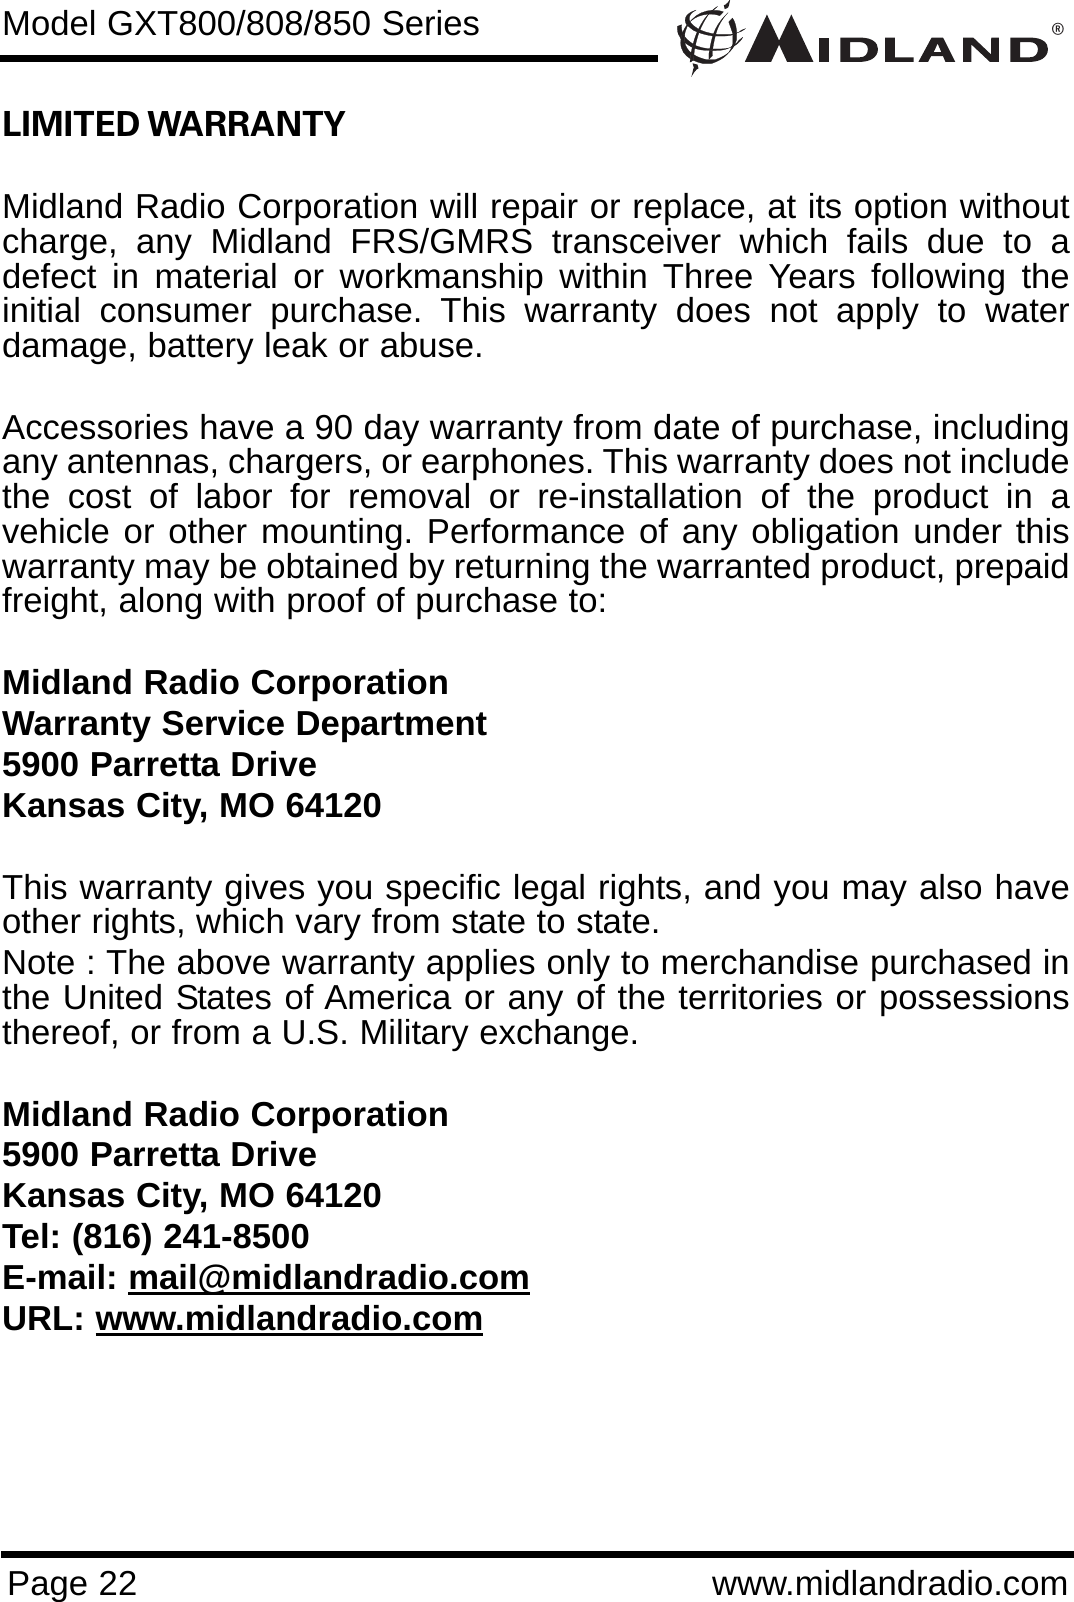 ®Page 22 www.midlandradio.comLIMITED WARRANTY Midland Radio Corporation will repair or replace, at its option withoutcharge, any Midland FRS/GMRS transceiver which fails due to adefect in material or workmanship within Three Years following theinitial consumer purchase. This warranty does not apply to waterdamage, battery leak or abuse.Accessories have a 90 day warranty from date of purchase, includingany antennas, chargers, or earphones. This warranty does not includethe cost of labor for removal or re-installation of the product in avehicle or other mounting. Performance of any obligation under thiswarranty may be obtained by returning the warranted product, prepaidfreight, along with proof of purchase to:Midland Radio CorporationWarranty Service Department5900 Parretta DriveKansas City, MO 64120This warranty gives you specific legal rights, and you may also haveother rights, which vary from state to state.Note : The above warranty applies only to merchandise purchased inthe United States of America or any of the territories or possessionsthereof, or from a U.S. Military exchange.Midland Radio Corporation5900 Parretta DriveKansas City, MO 64120Tel: (816) 241-8500E-mail: mail@midlandradio.comURL: www.midlandradio.comModel GXT800/808/850 Series